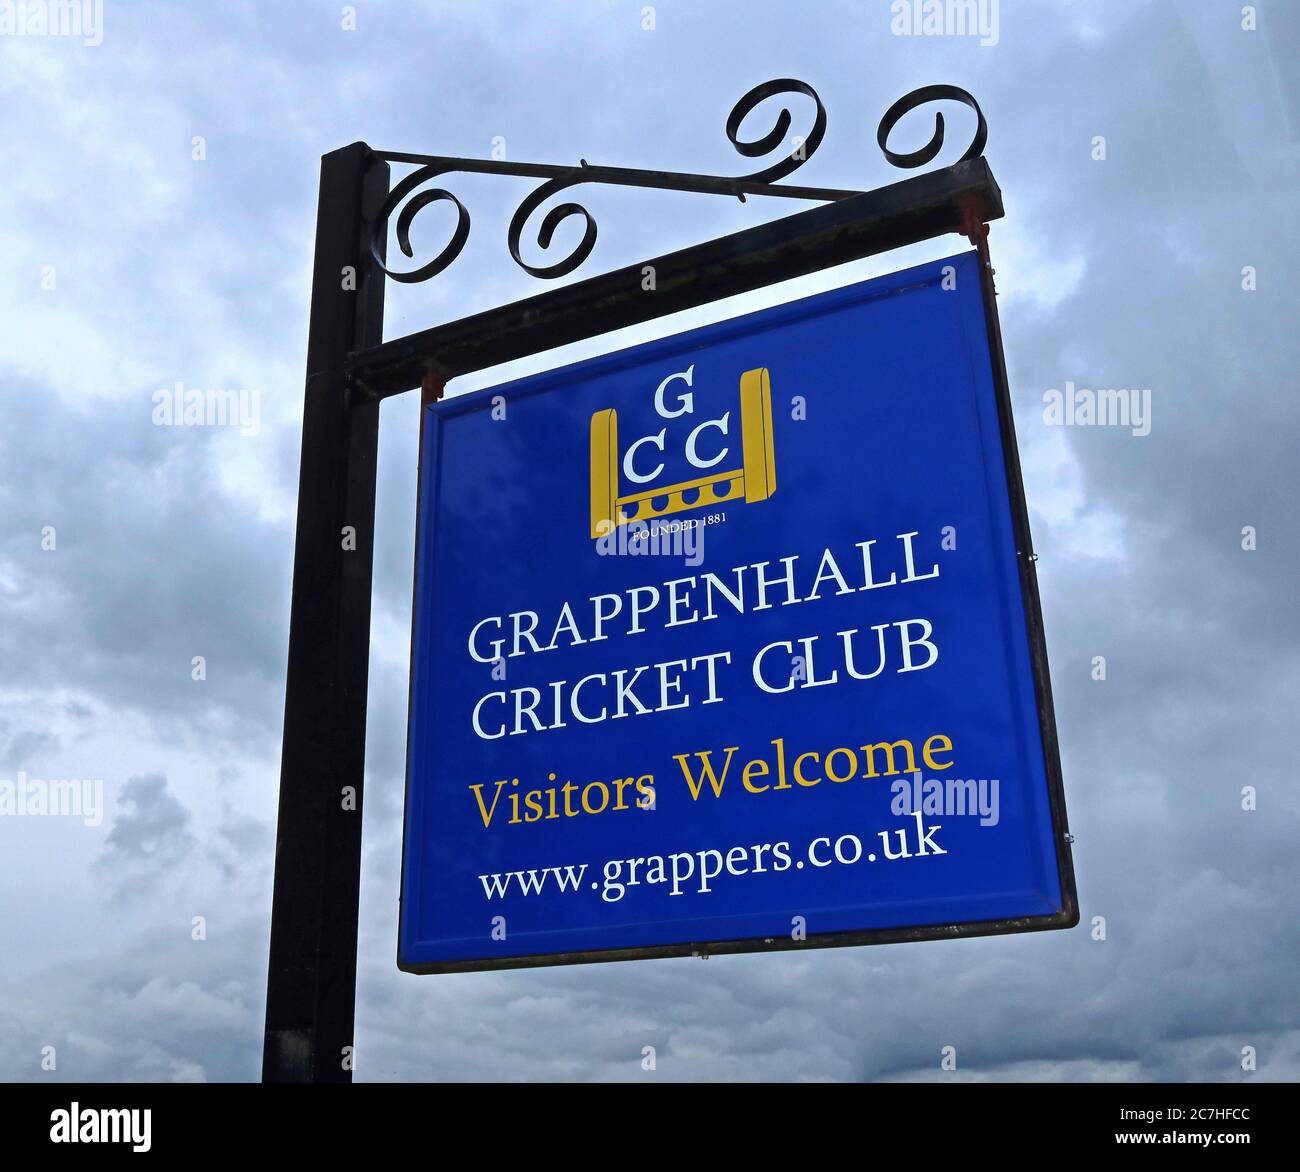 Grappenhall Cricket Club Sign, GCC, Grappers, Broad Lane, Grappenhall, Warrington, Cheshire, England, UK, WA4 3EH Stock Photo